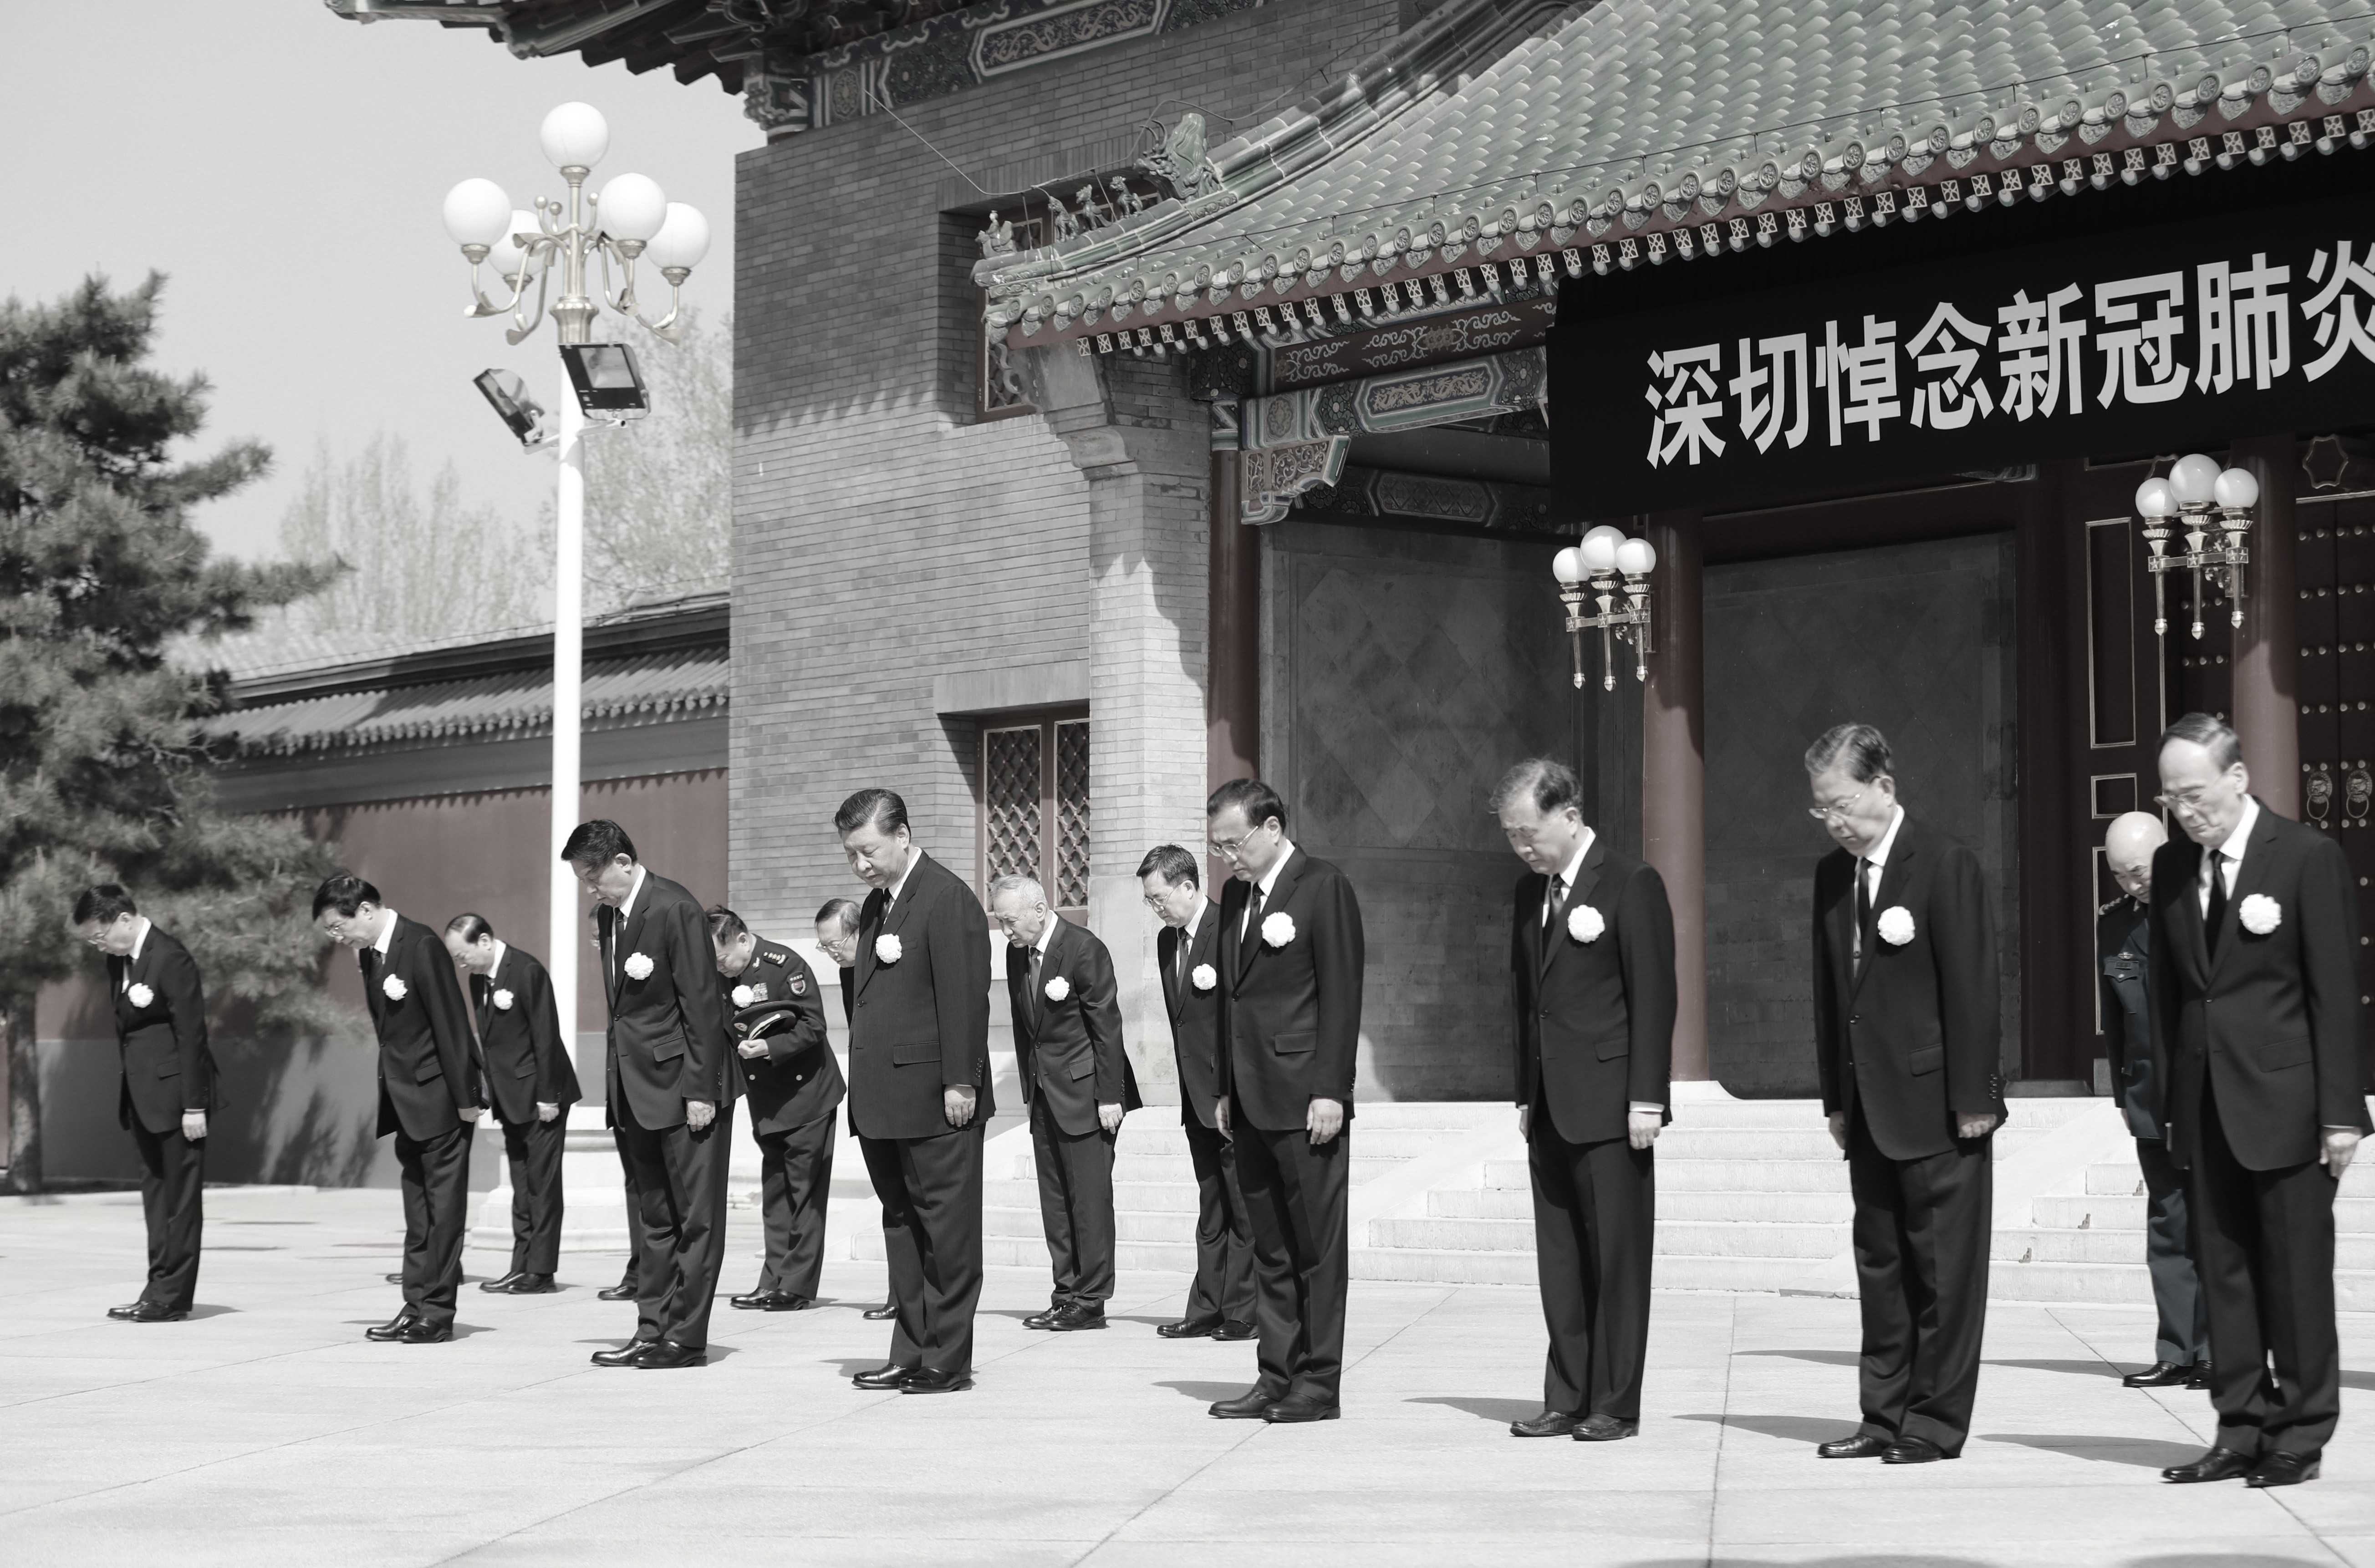 Xi Jinping, Li Keqiang, Li Zhanshu, Wang Yang, Wang Huning, Zhao Leji, Han Zheng and Wang Qishan, as well as other Party and state leaders, stand in silence during the national mourning for martyrs who died fighting the novel coronavirus disease (COVID-19) and compatriots who lost their lives in the outbreak, in the Zhongnanhai leadership compound in Beijing, capital of China, at 10:00 a.m. on April 4, 2020. (Xinhua/Pang Xinglei)